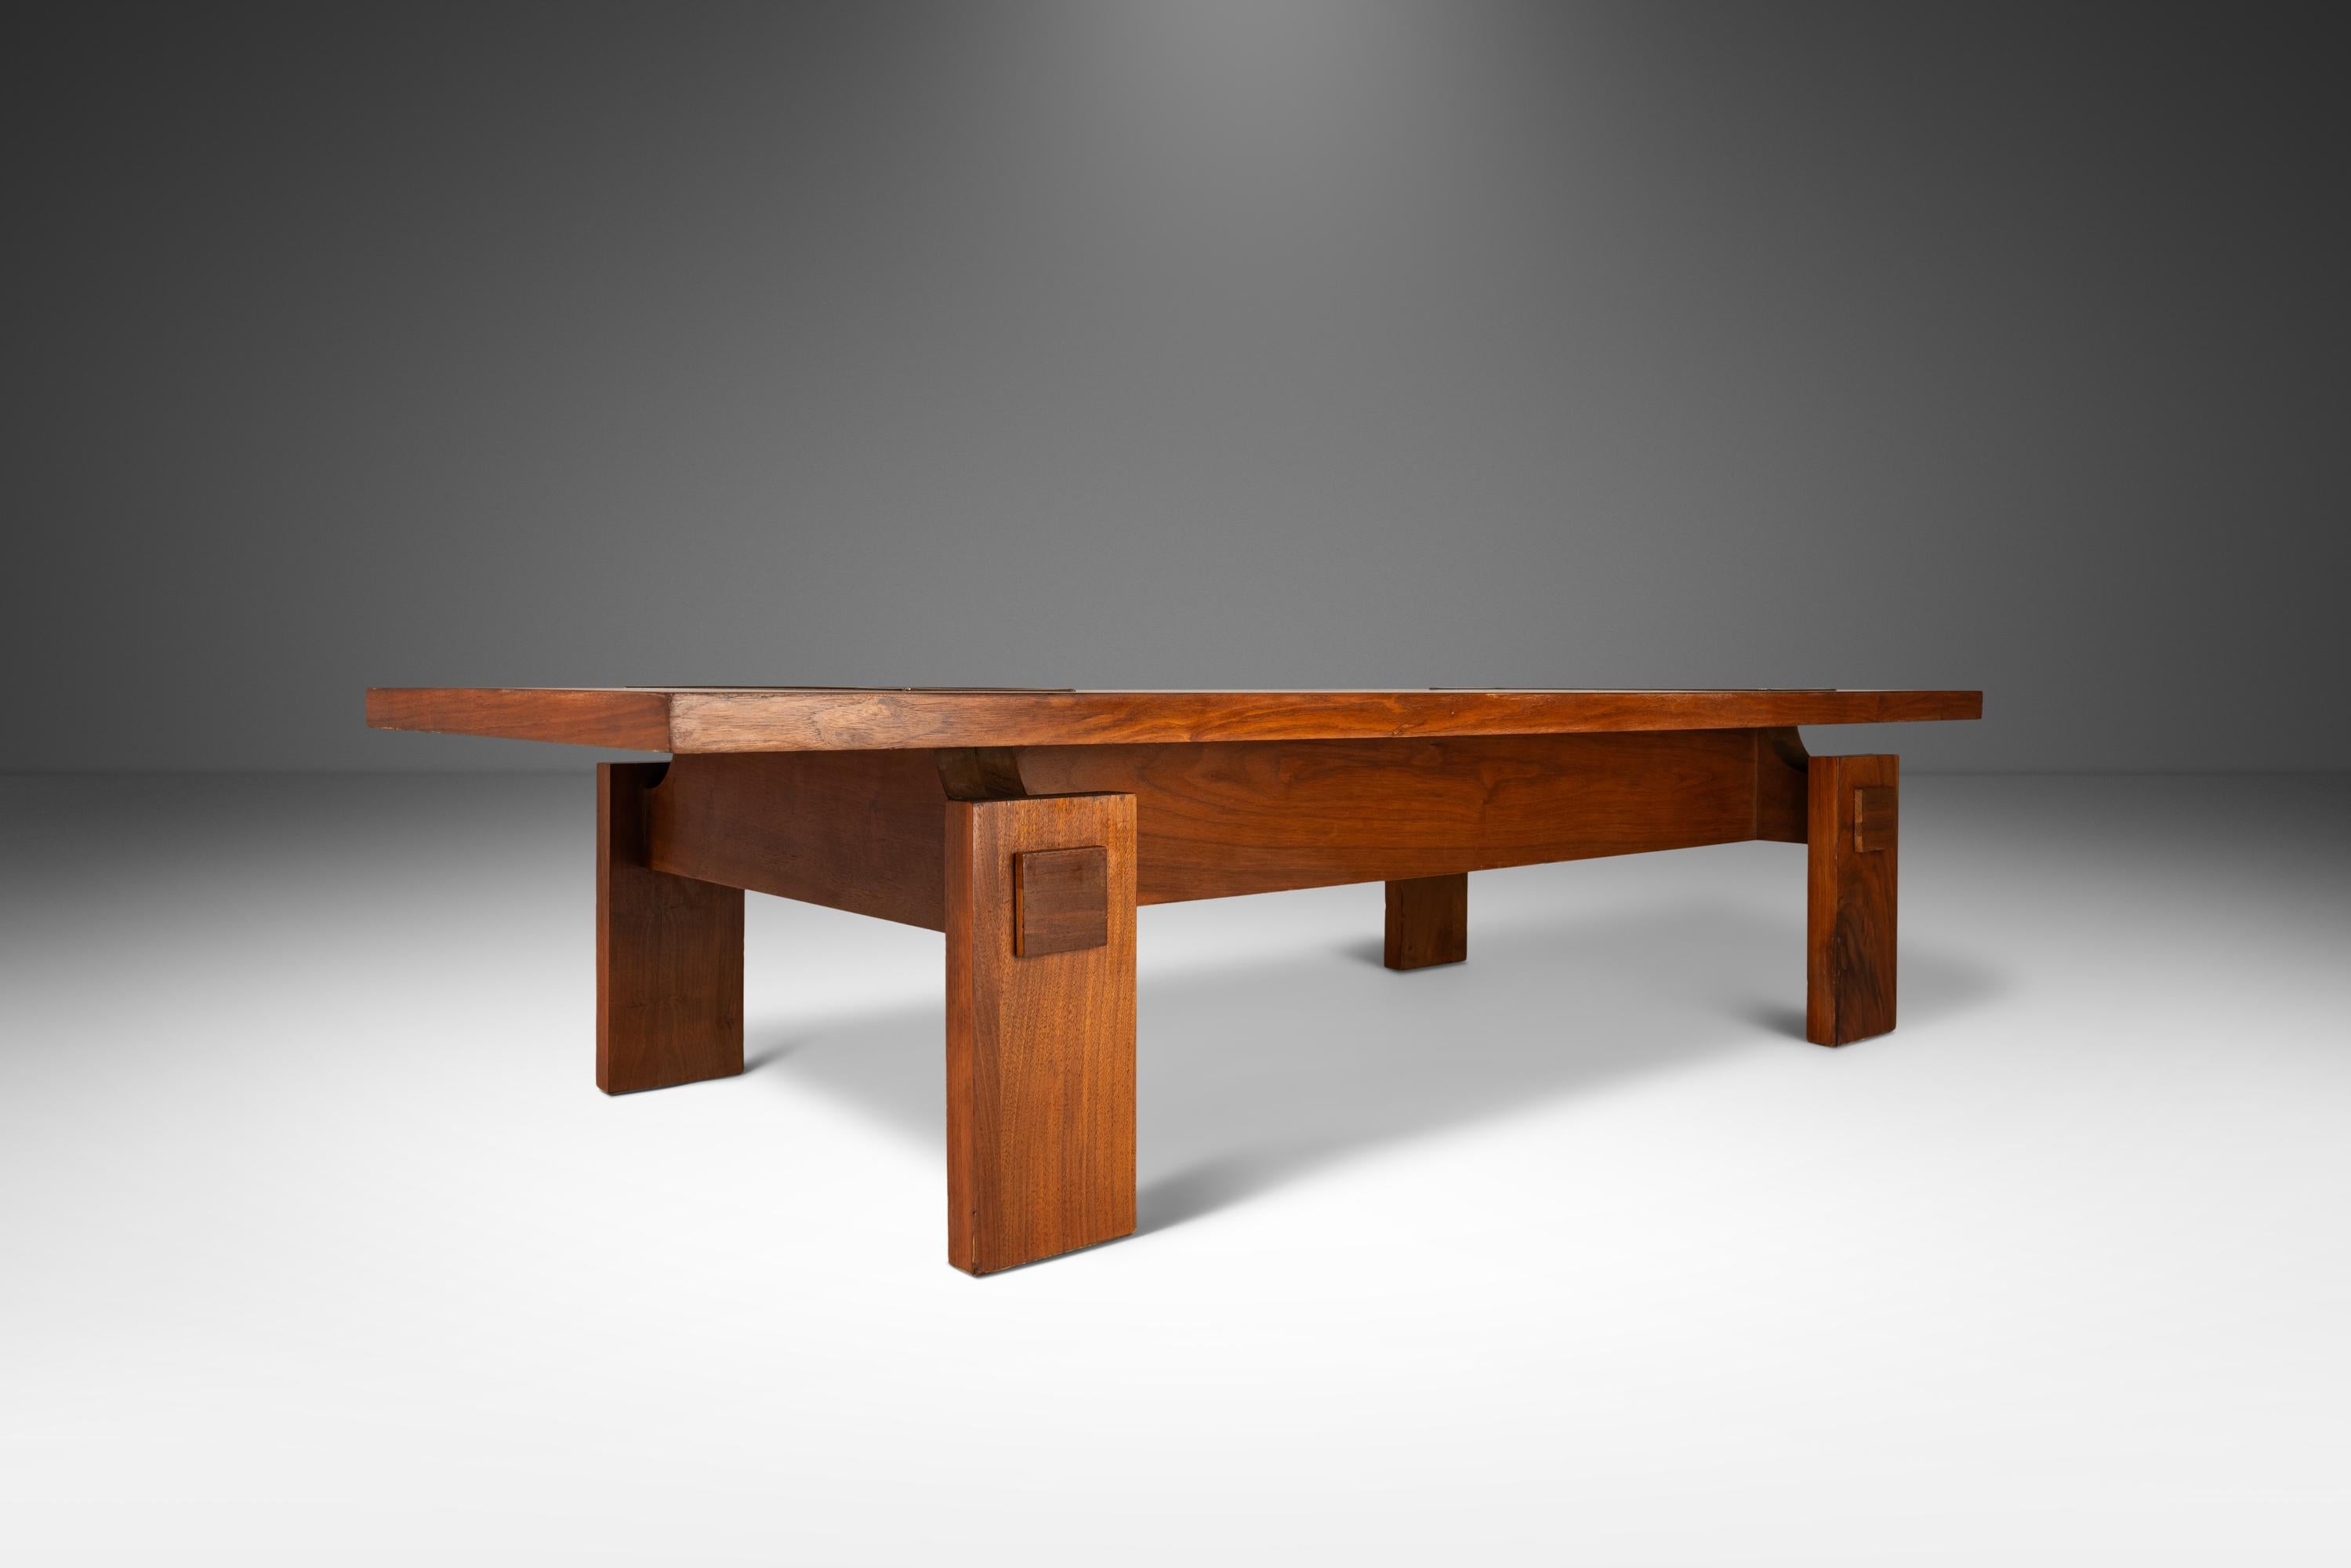 Introducing a stunning piece of vintage furniture that is sure to elevate any living space. This late 1970's Lane Furniture Brutalist coffee table is constructed from beautiful American black walnut wood, featuring a long, rectangular design with